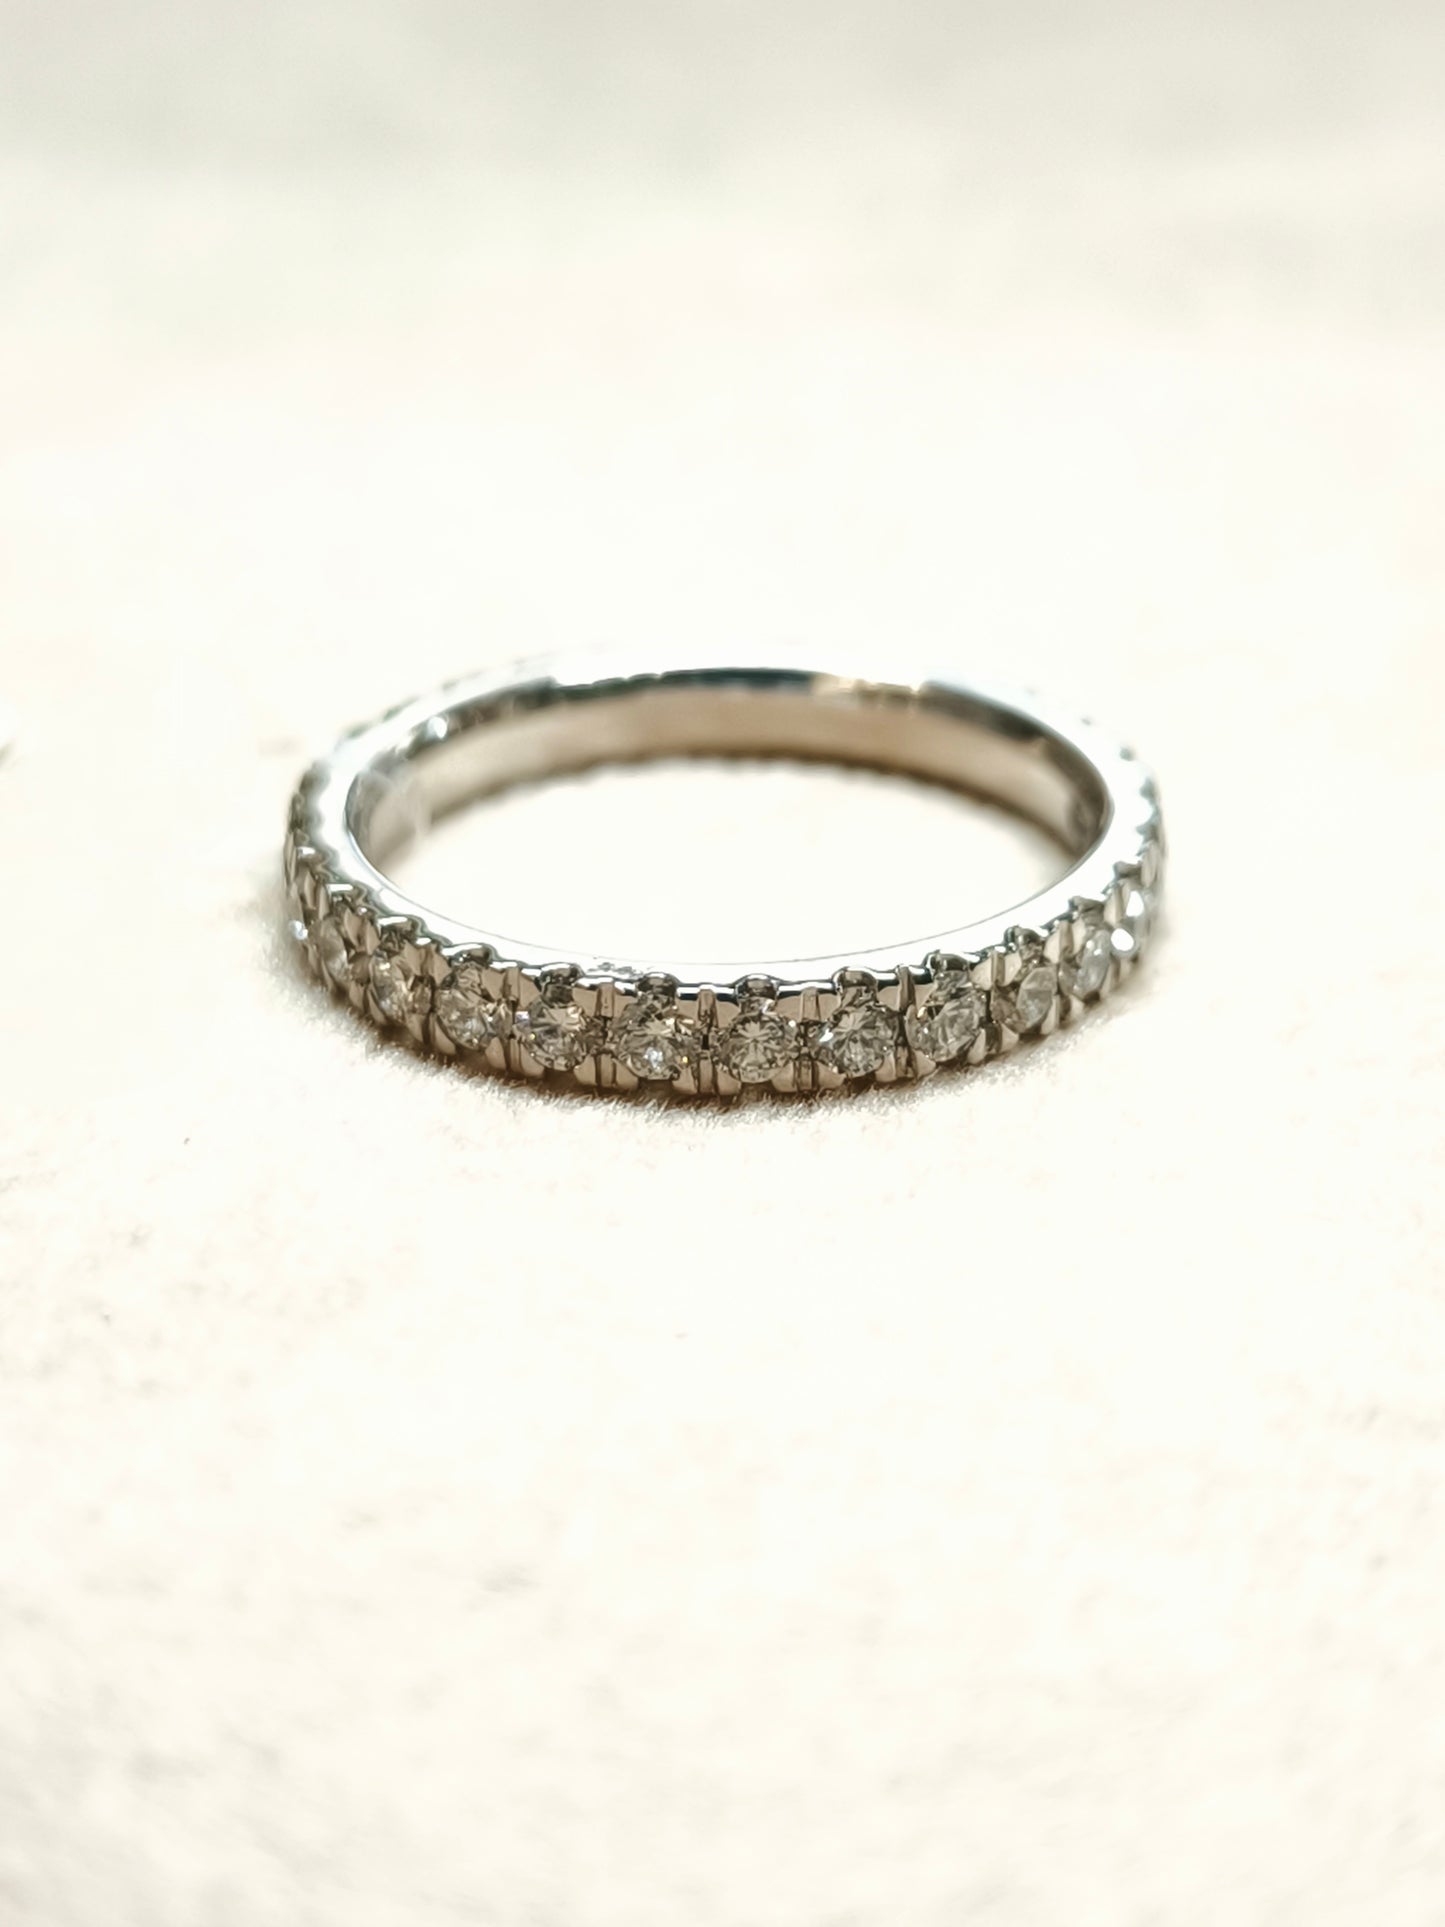 Complete wedding band ring in gold with 1.00ct diamonds